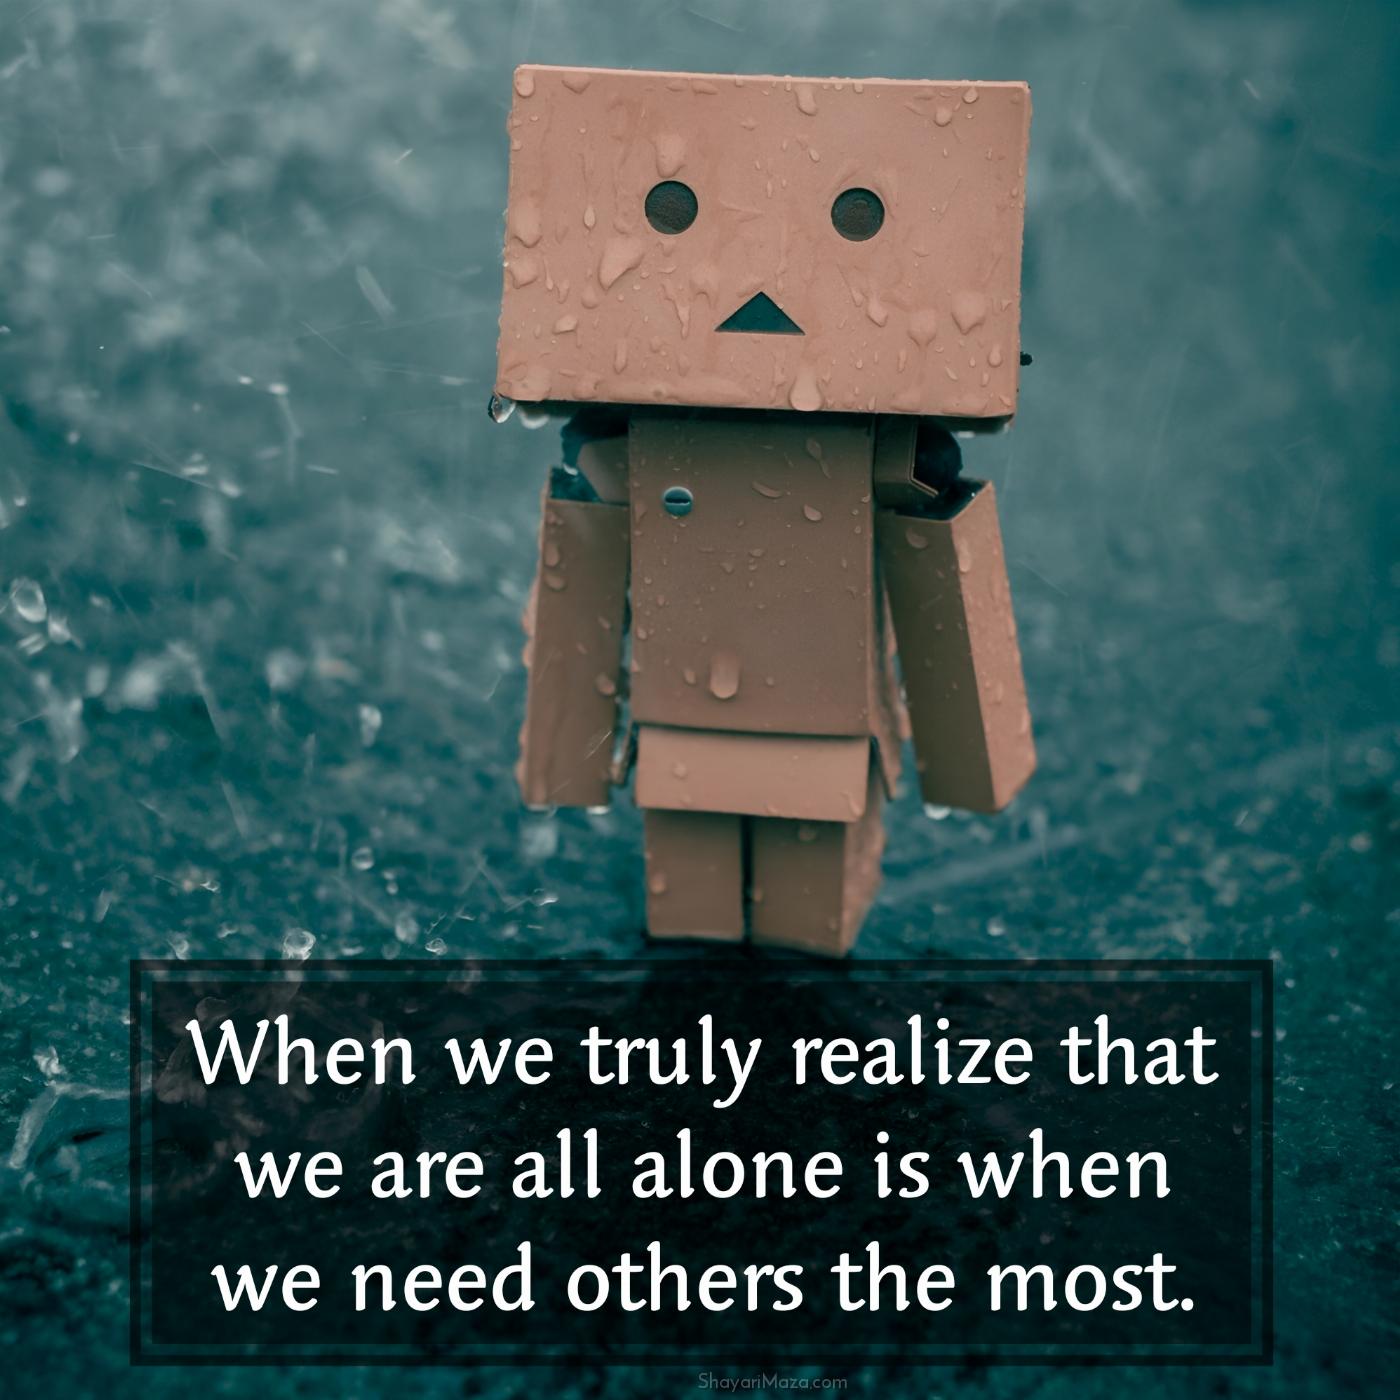 When we truly realize that we are all alone is when